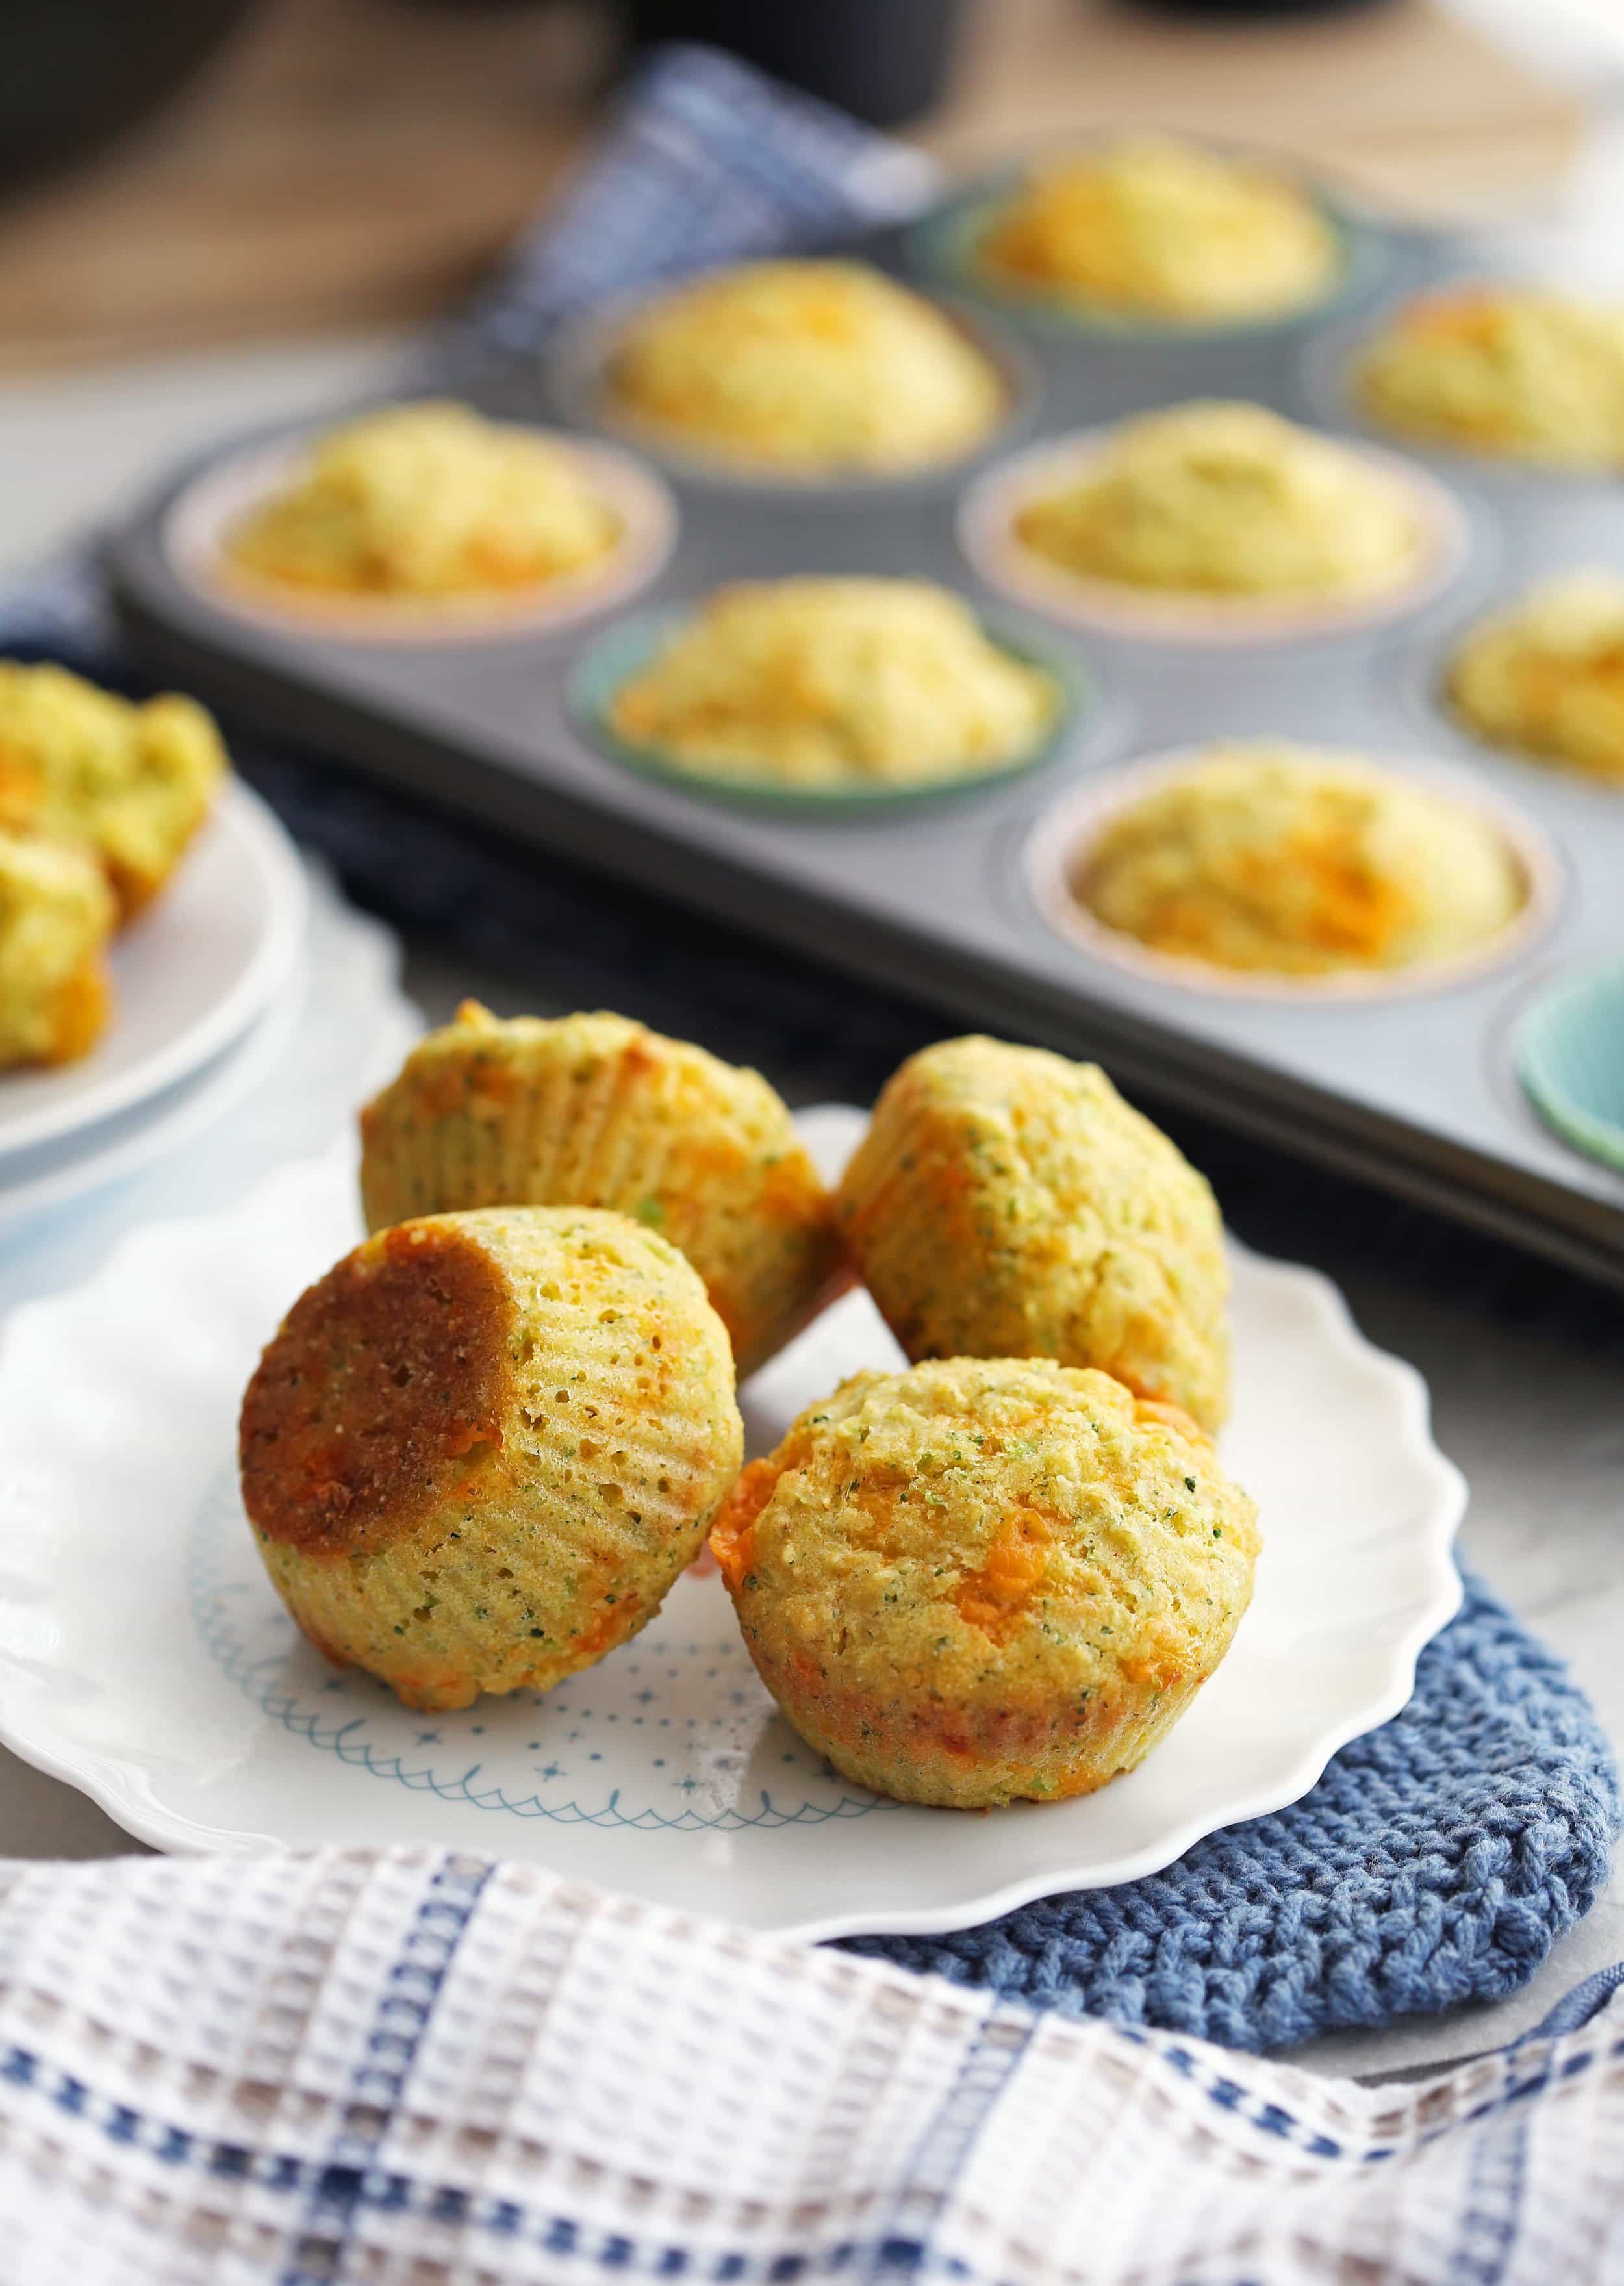 Four Broccoli Cheddar Cornbread Muffins on a white plate with more muffins in a muffin pan behind them.